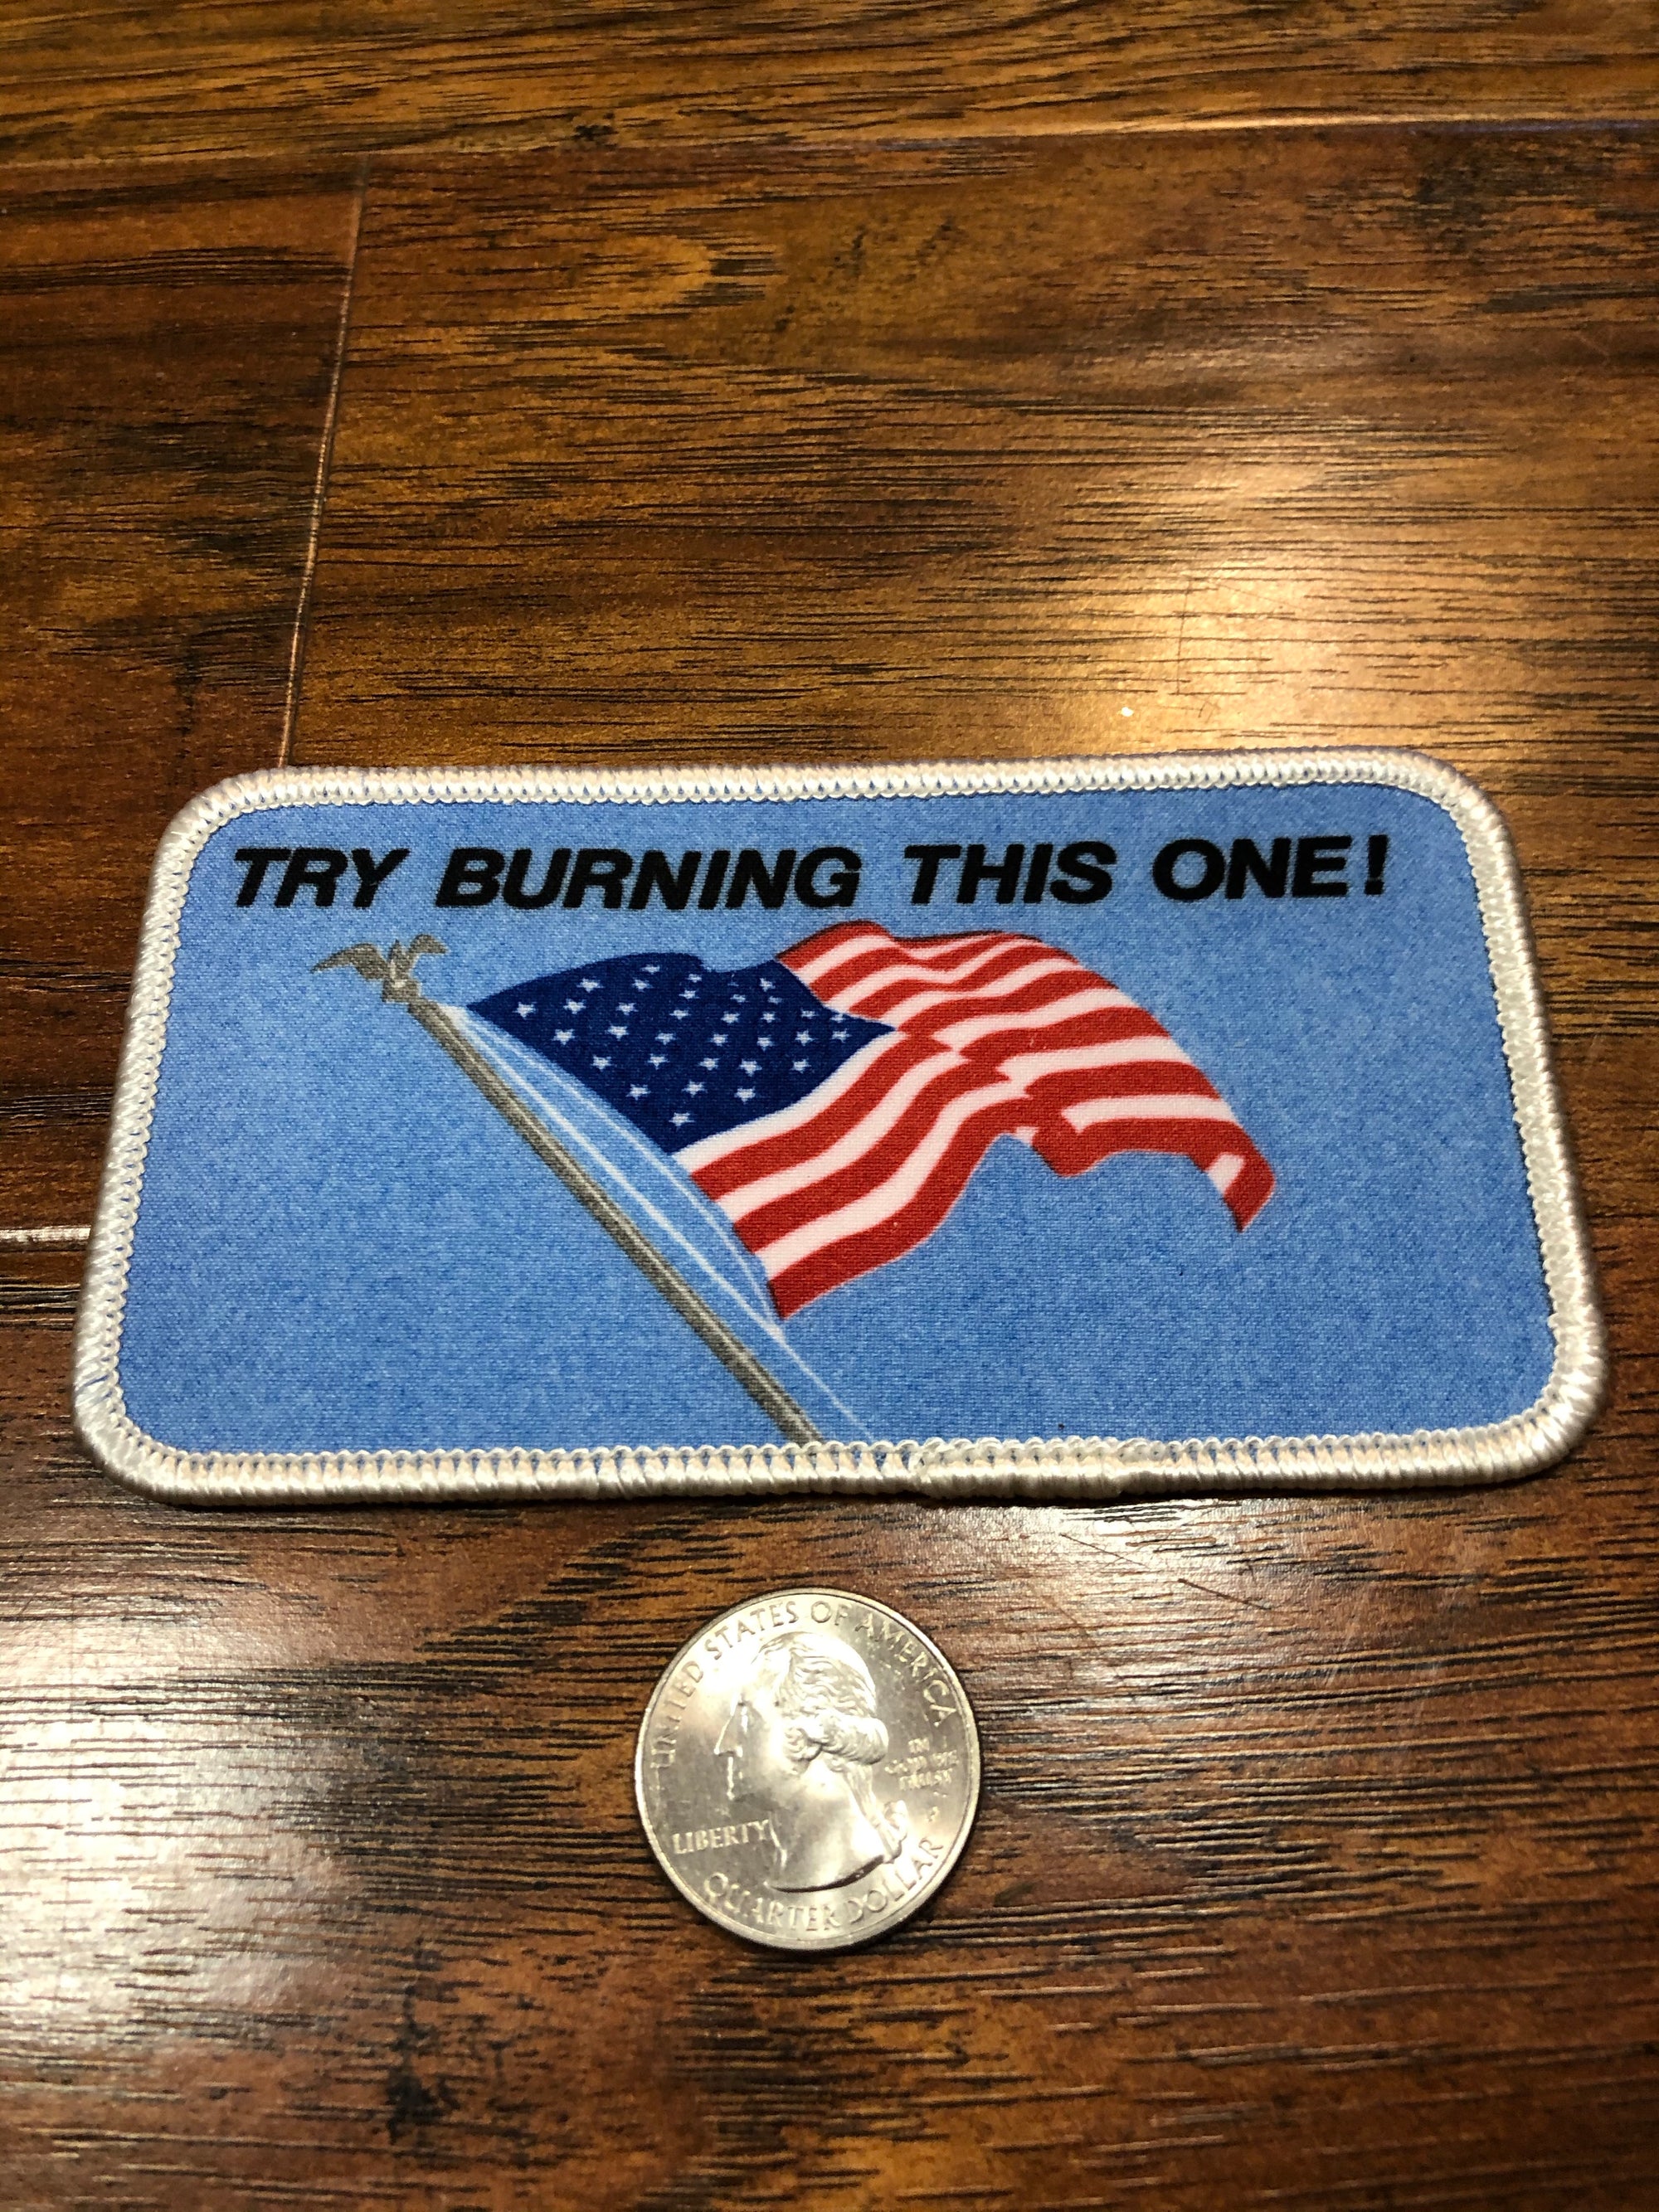 Try Burning This One!